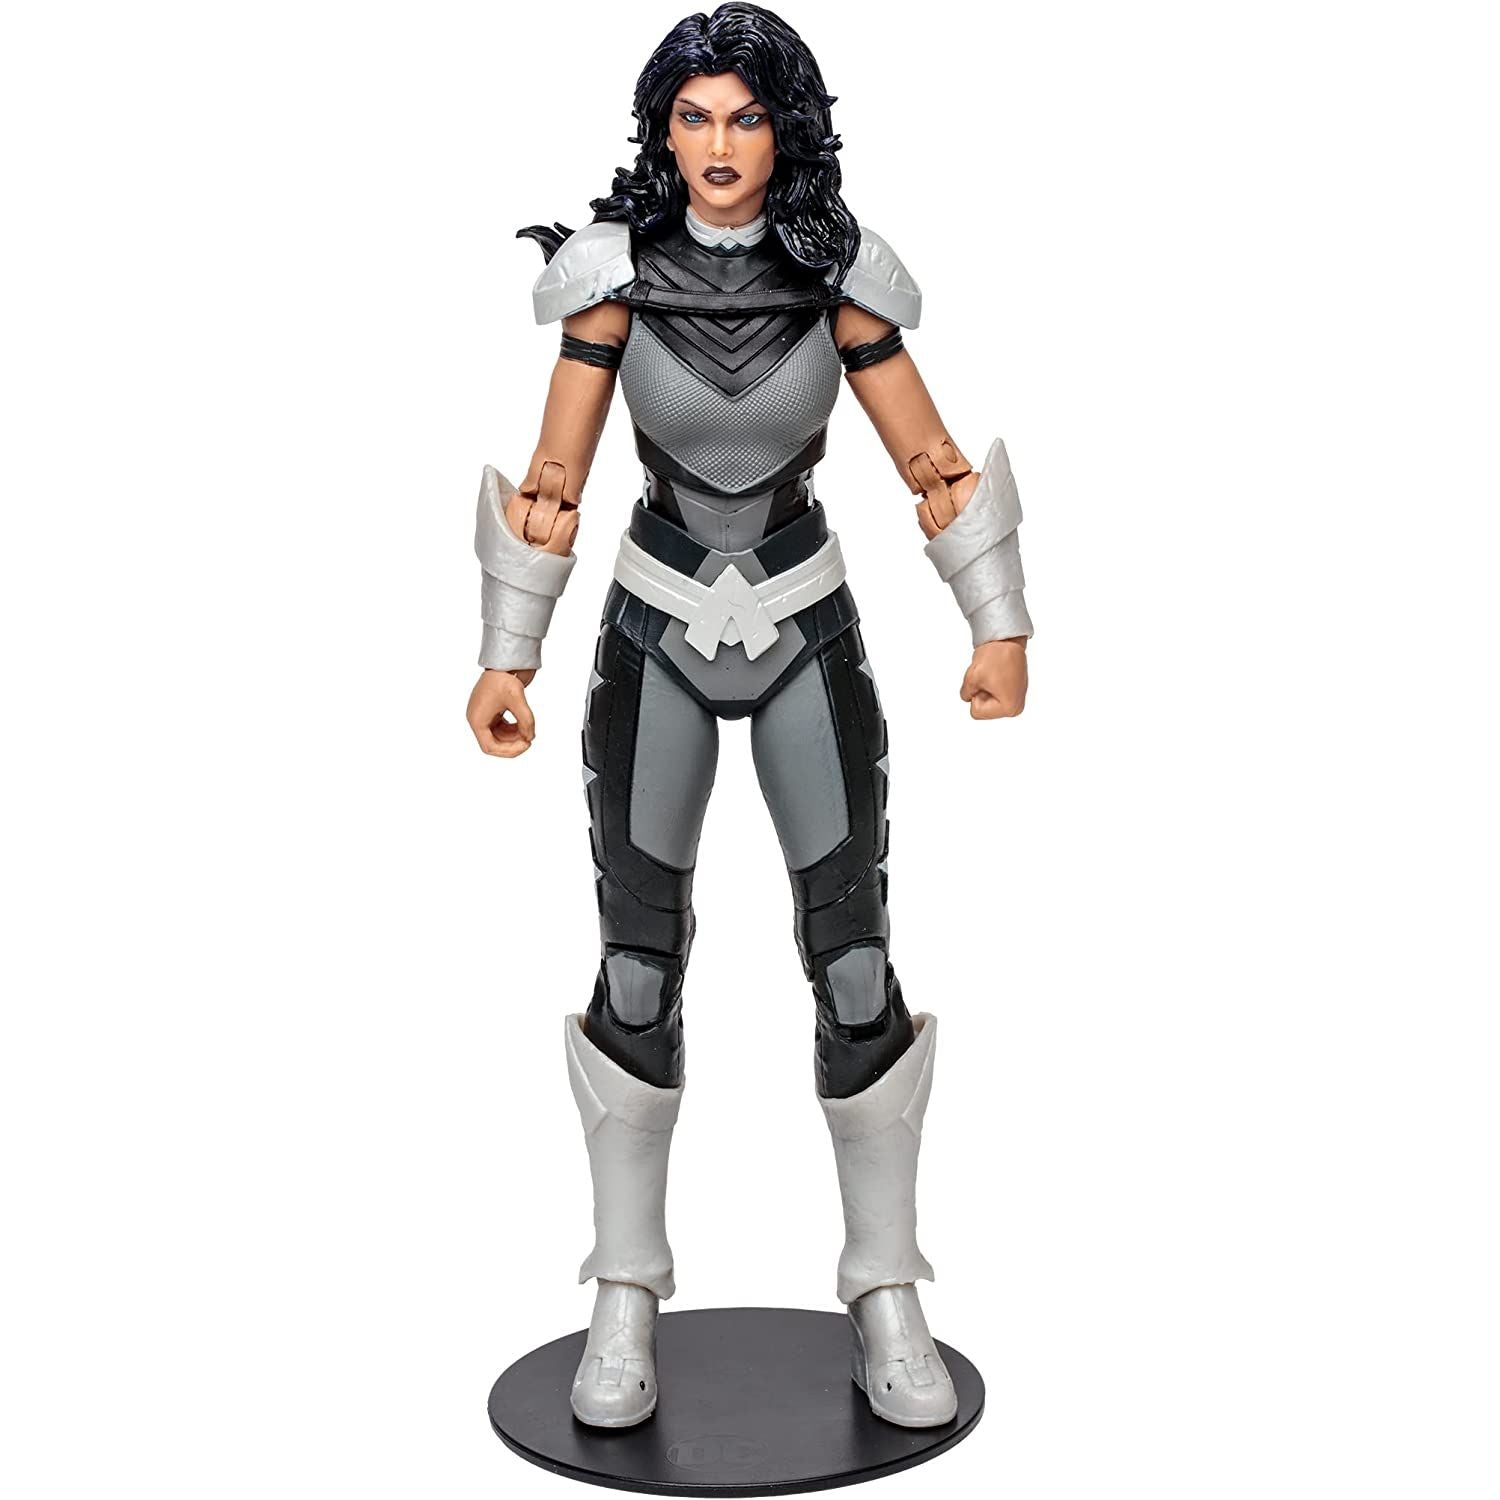 DC Multiverse Donna Troy (Titans) 7in Build-A Figure Action Figure Toy - Heretoserveyou